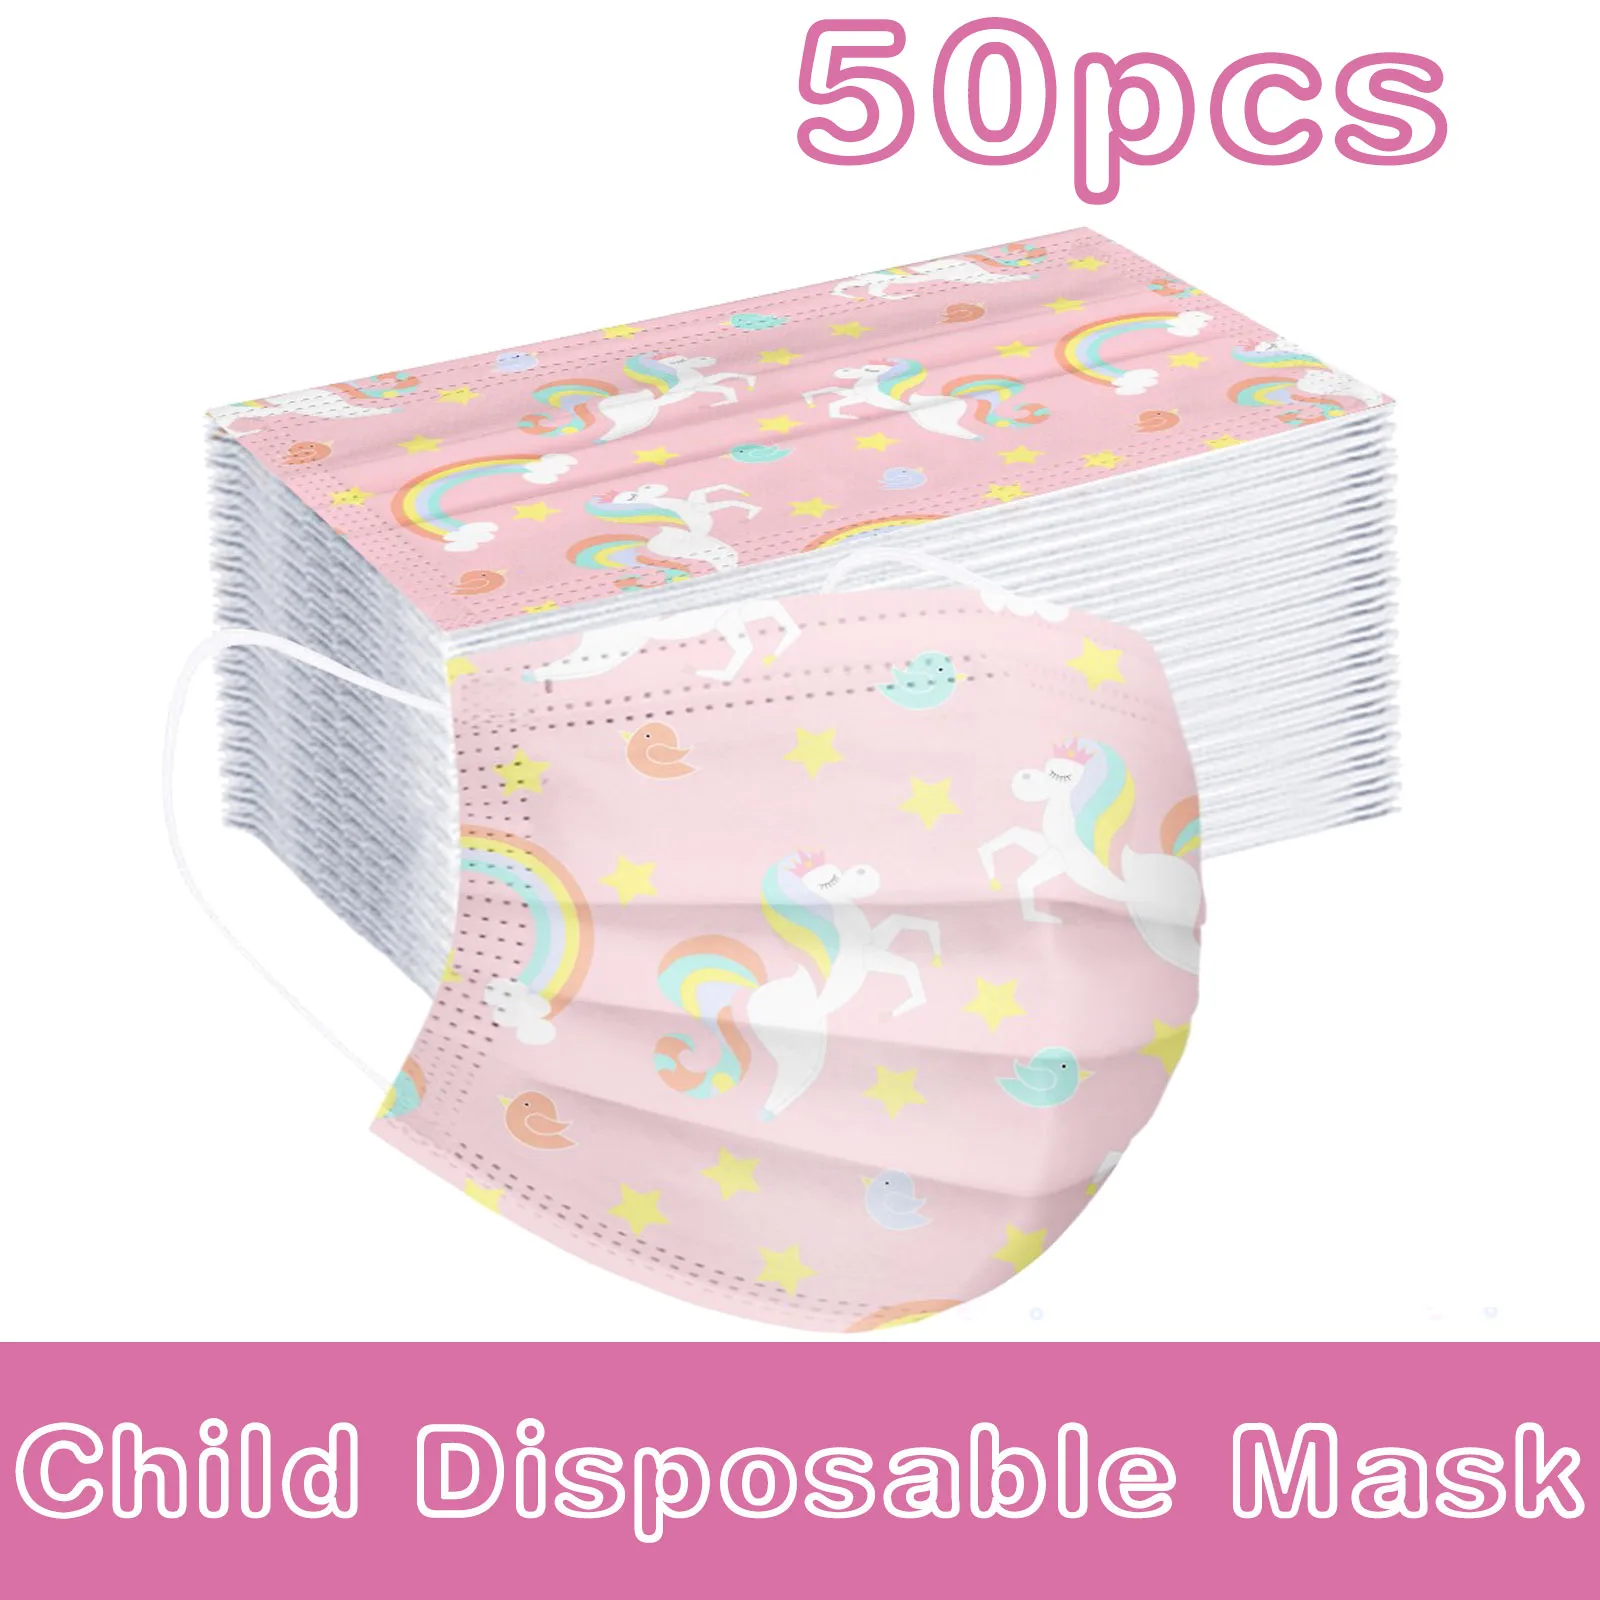 

50 pcs Children's mask Mascarillas Disposable Face Mask rainbow Pattern print 3 Ply Ear Loop Face Mask fashion For Kids Facem